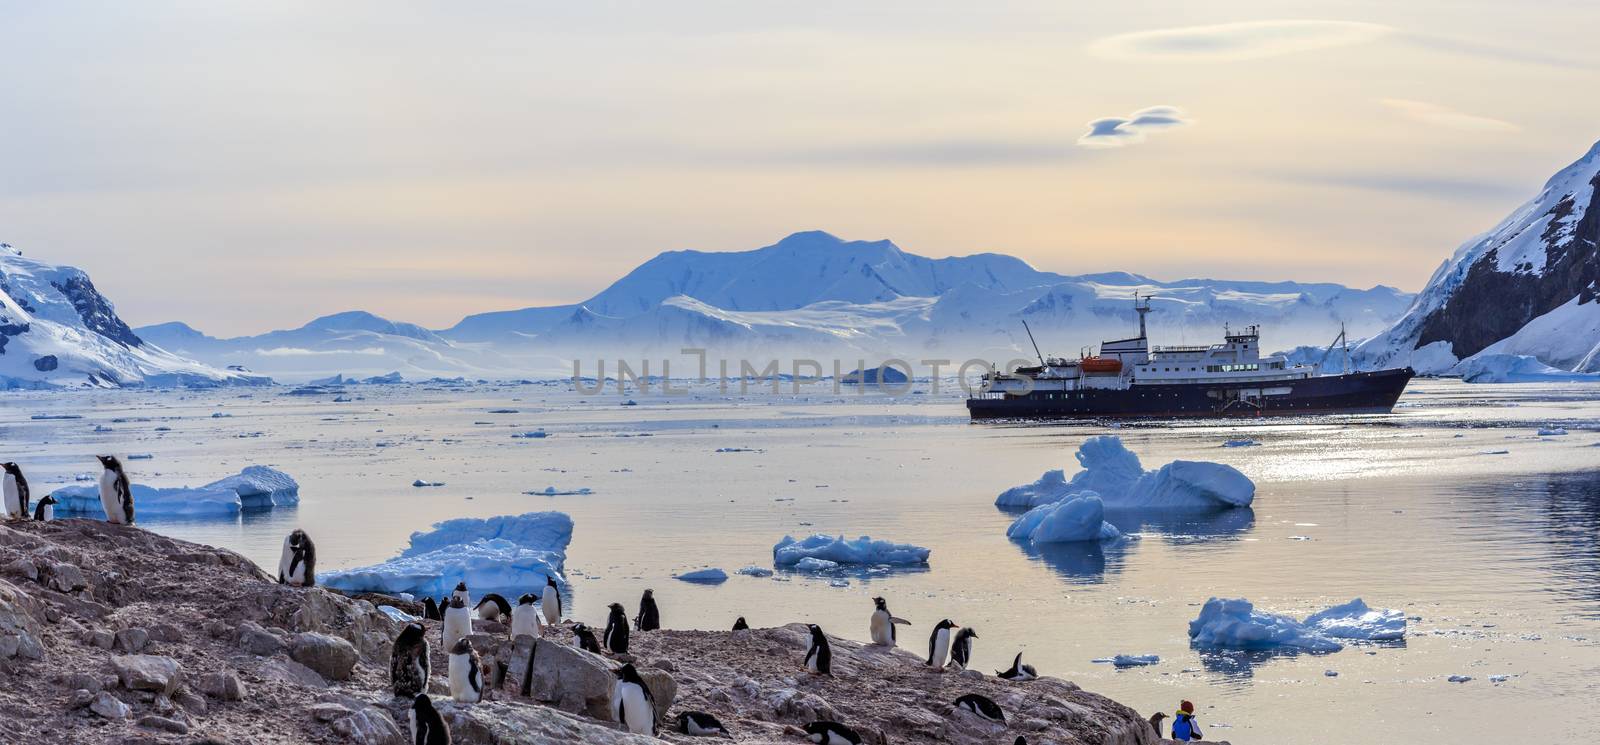 Antarctic cruise ship among icebergs and Gentoo penguins gathered on the shore of Neco bay, Antarctica